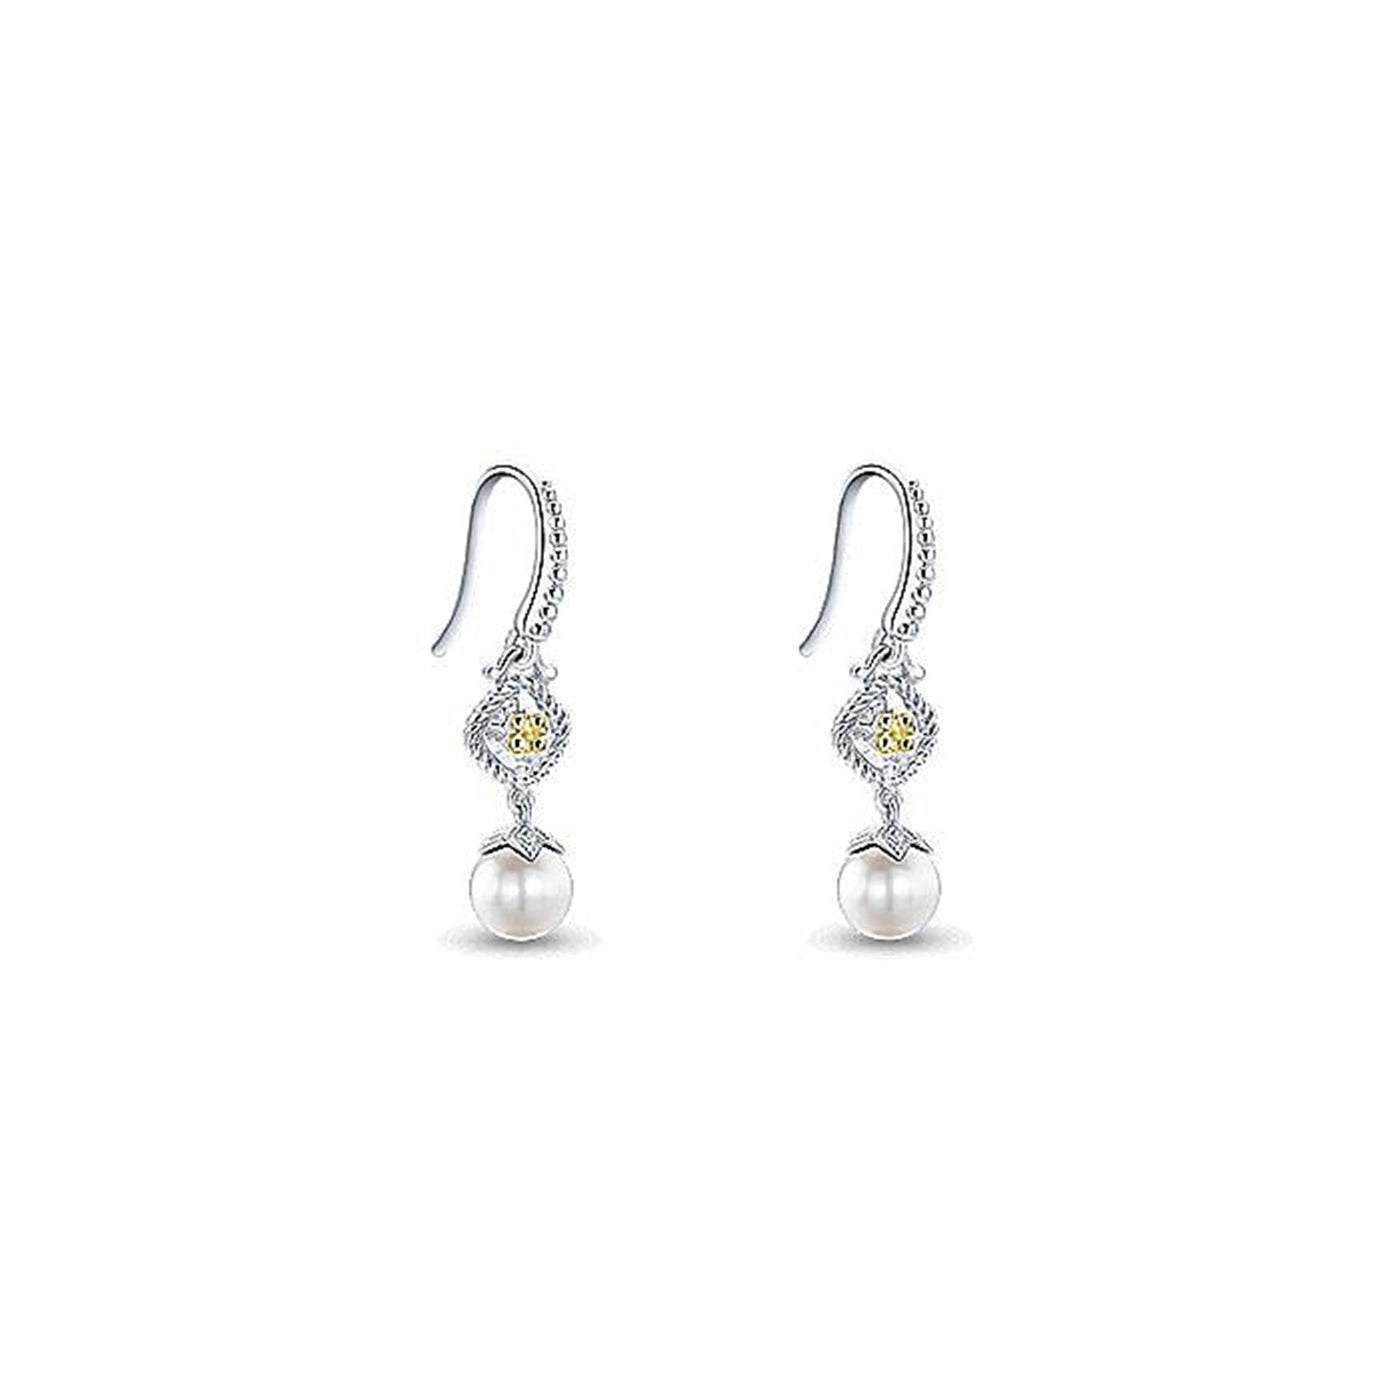 Gabriel Sterling Silver 1.08ctw Drop Style Earrings Featuring Cultured Pearls